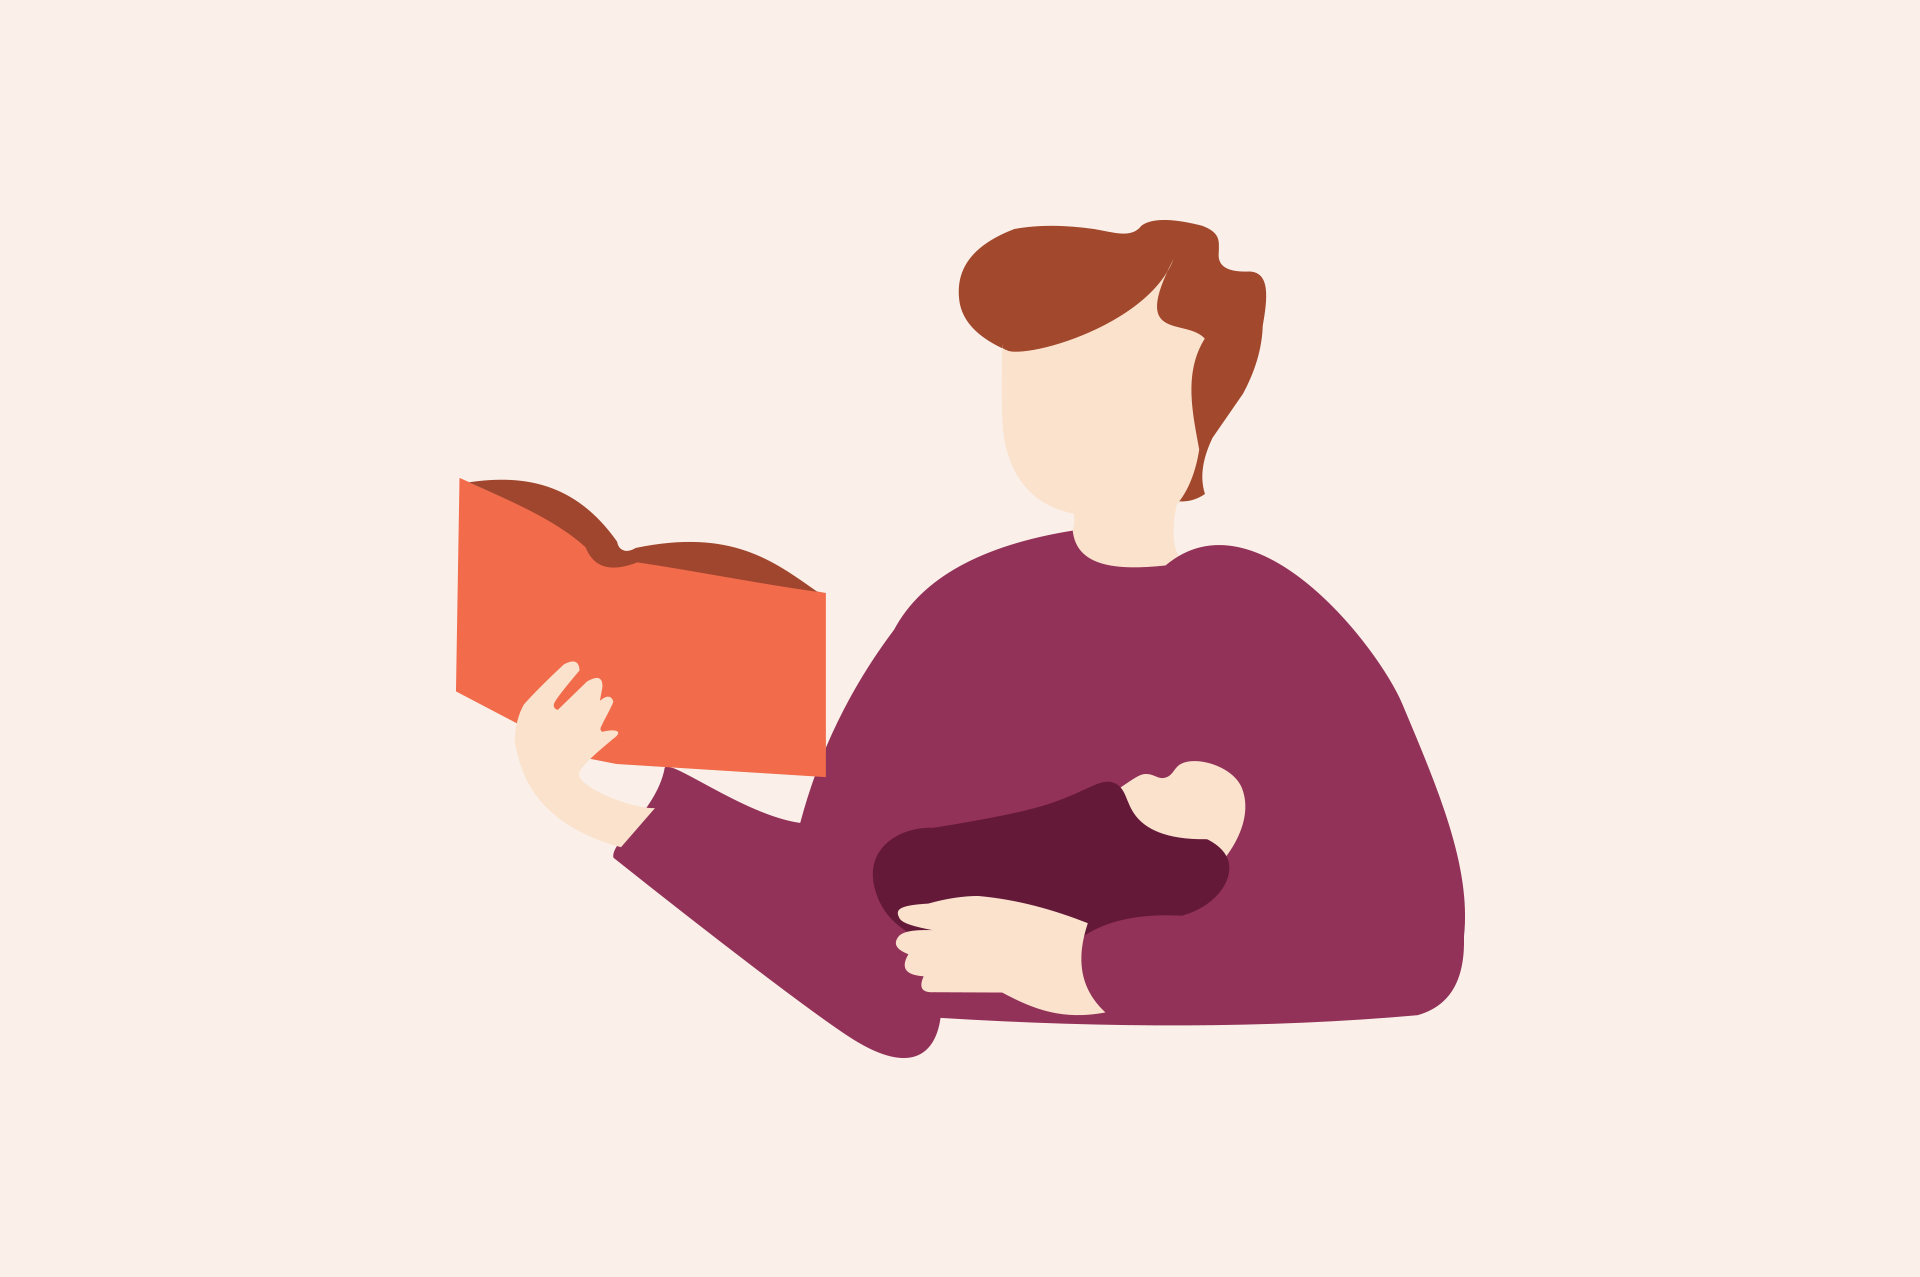 An illustration of a person holding a book in one hand and an infant in the other